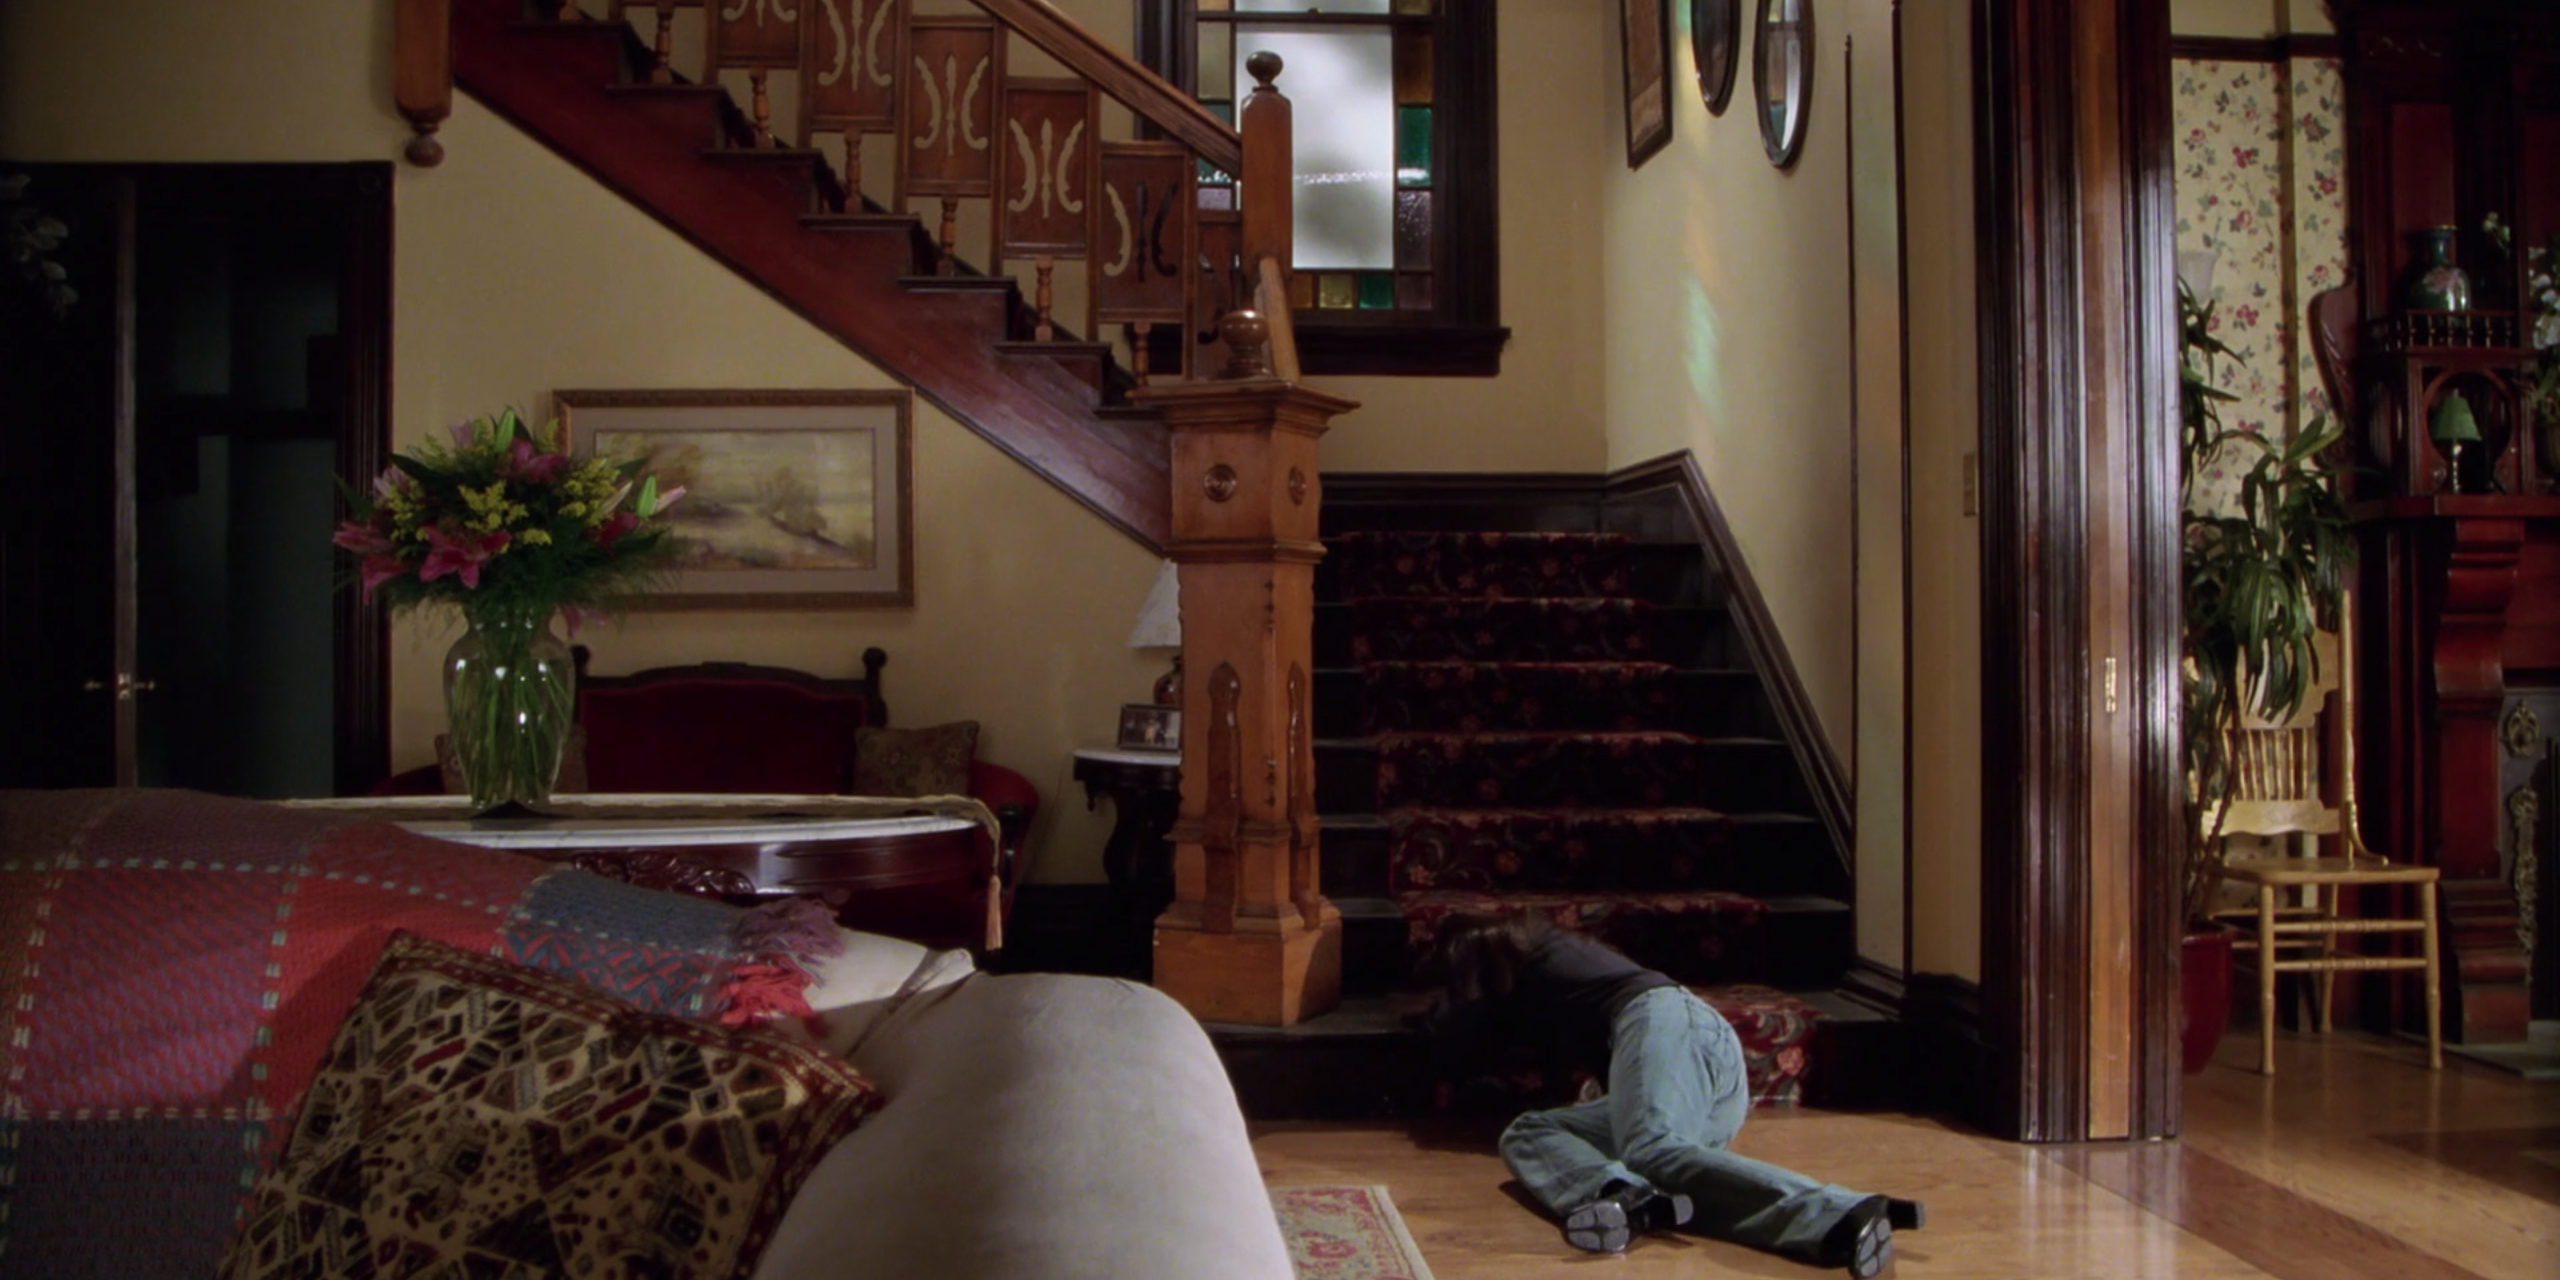 Piper's body sinks to the stairs in Charmed